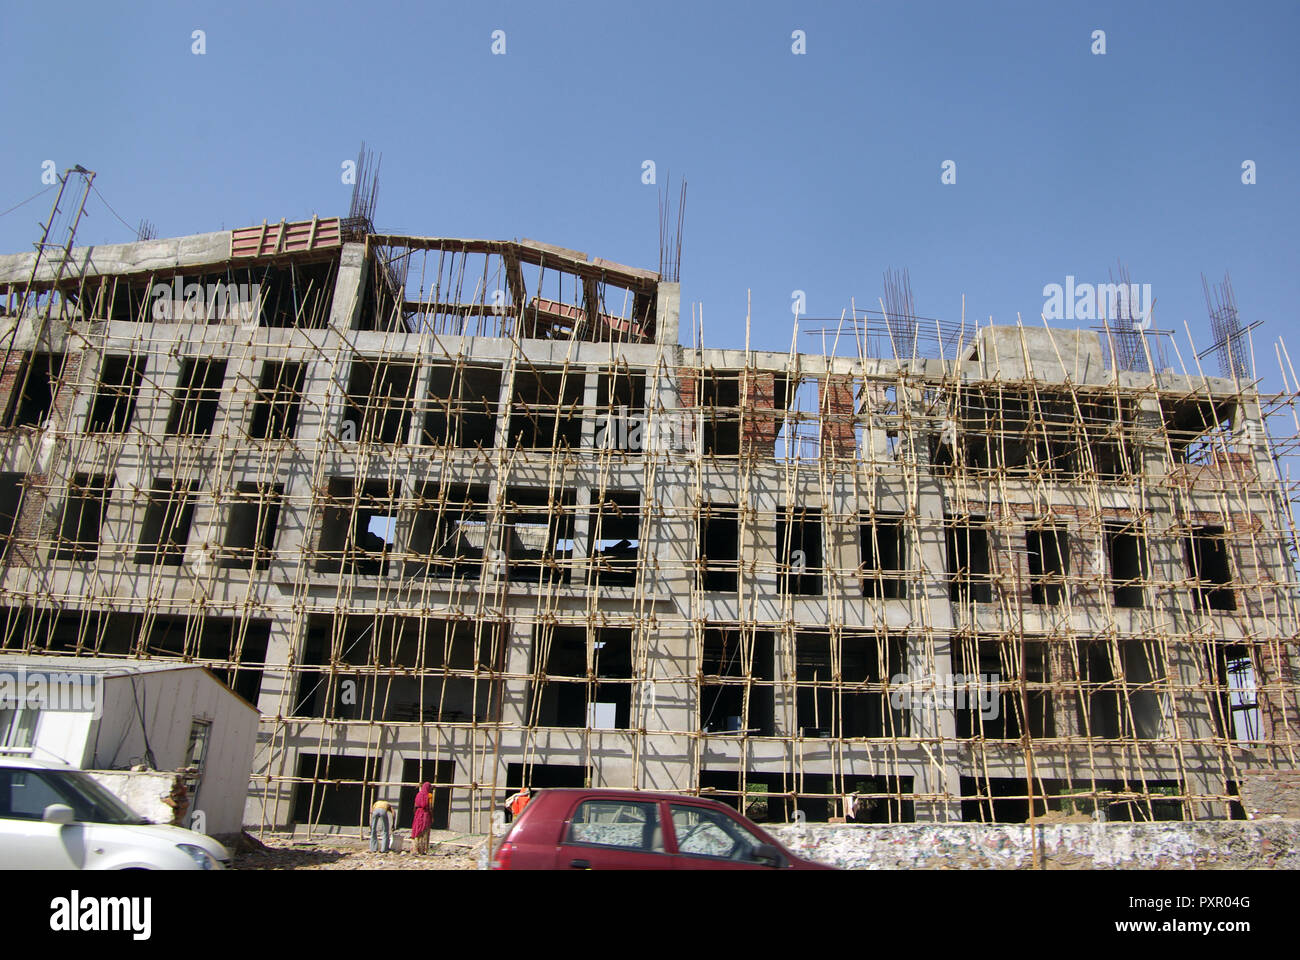 Ajmer, Rajasthan, India. Construction site Stock Photo